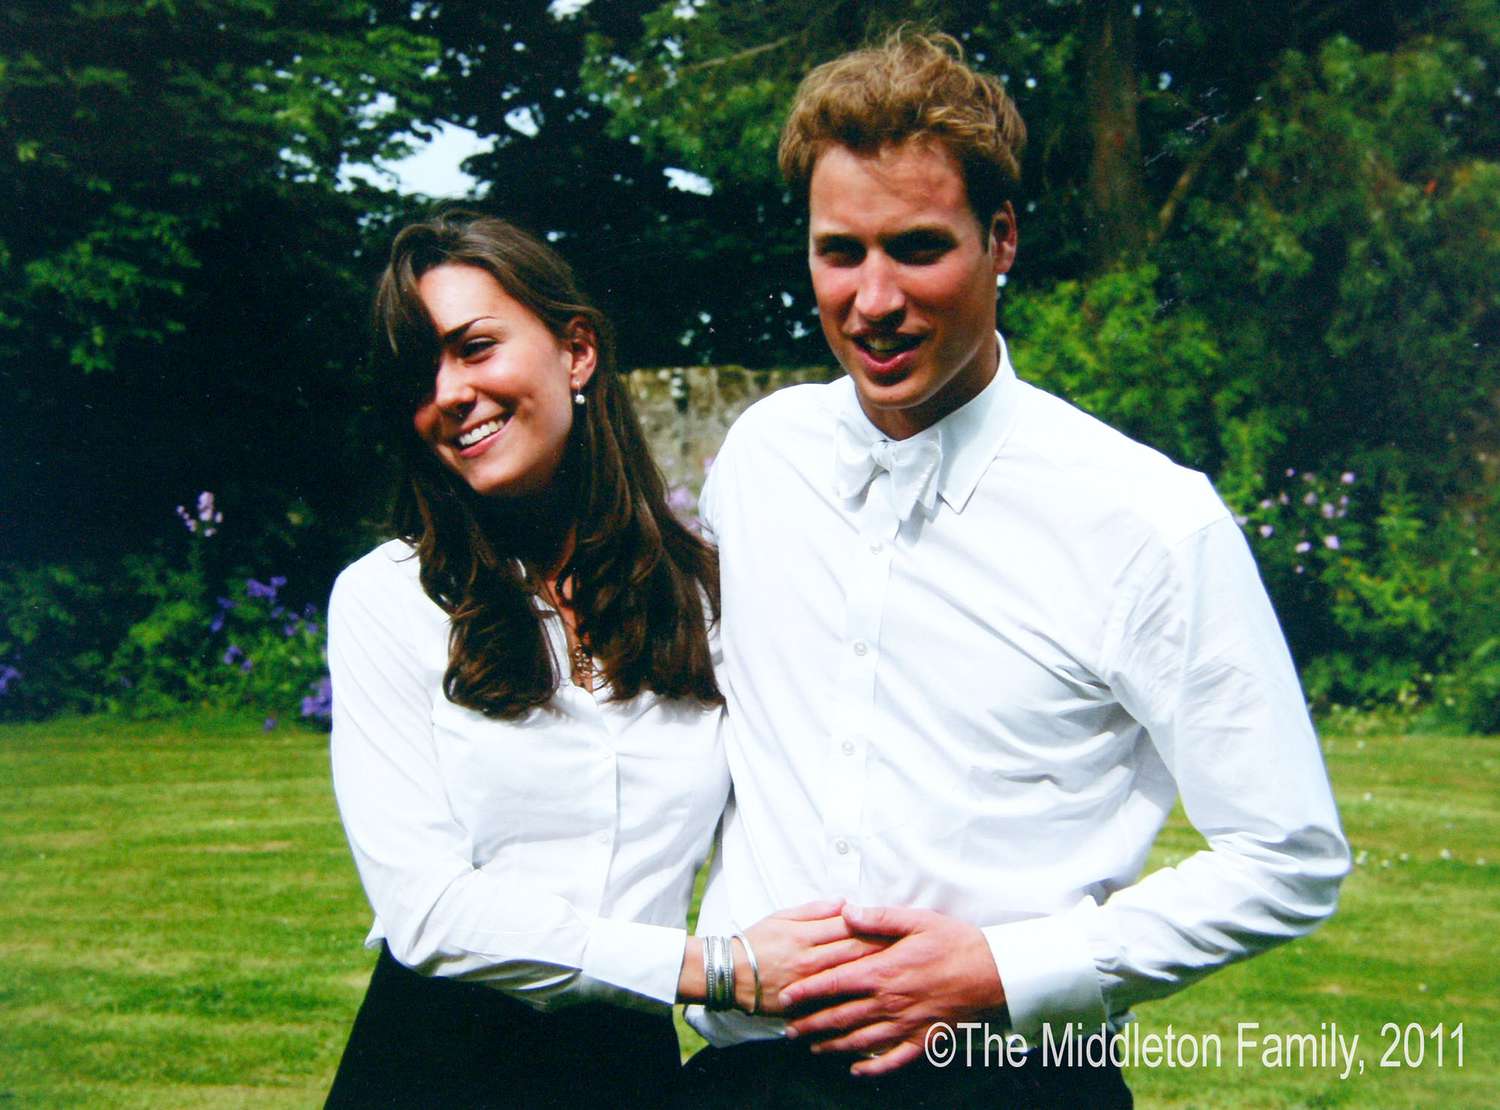 Middleton Family/Clarence House via Getty